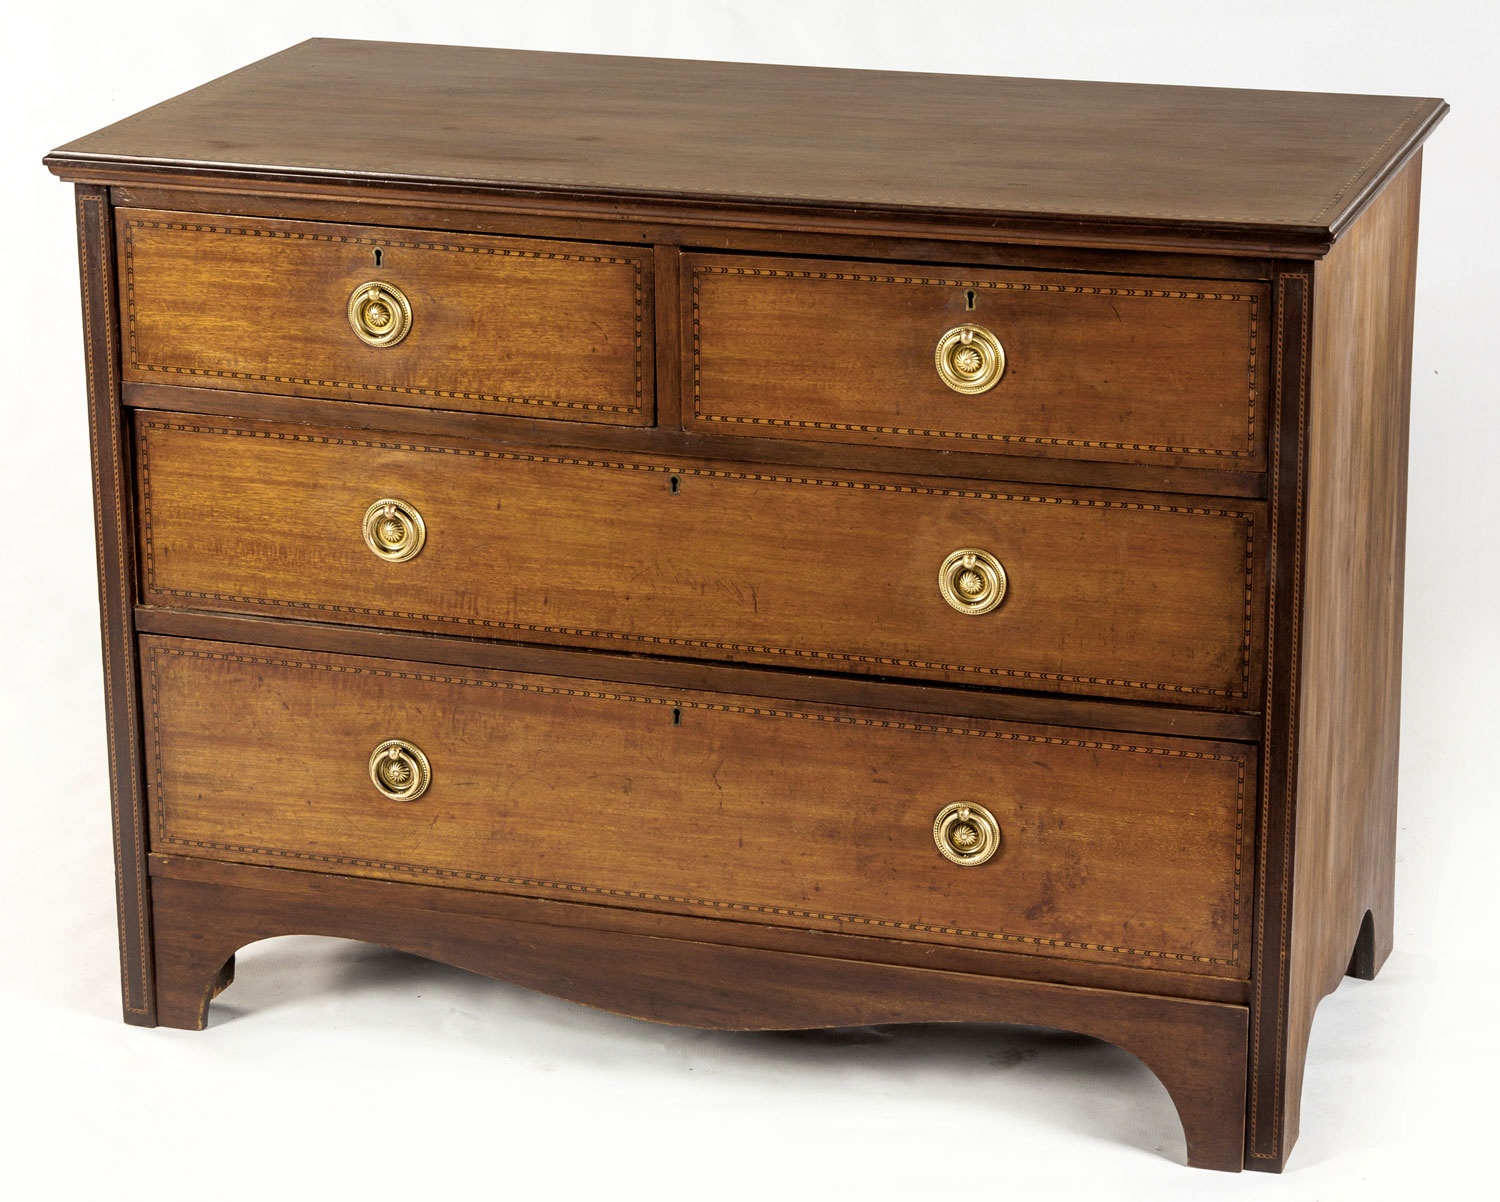 A MAHOGANY AND INLAID CHEST-OF-DRAWERS, LATE 19TH/EARLY 20TH CENTURY